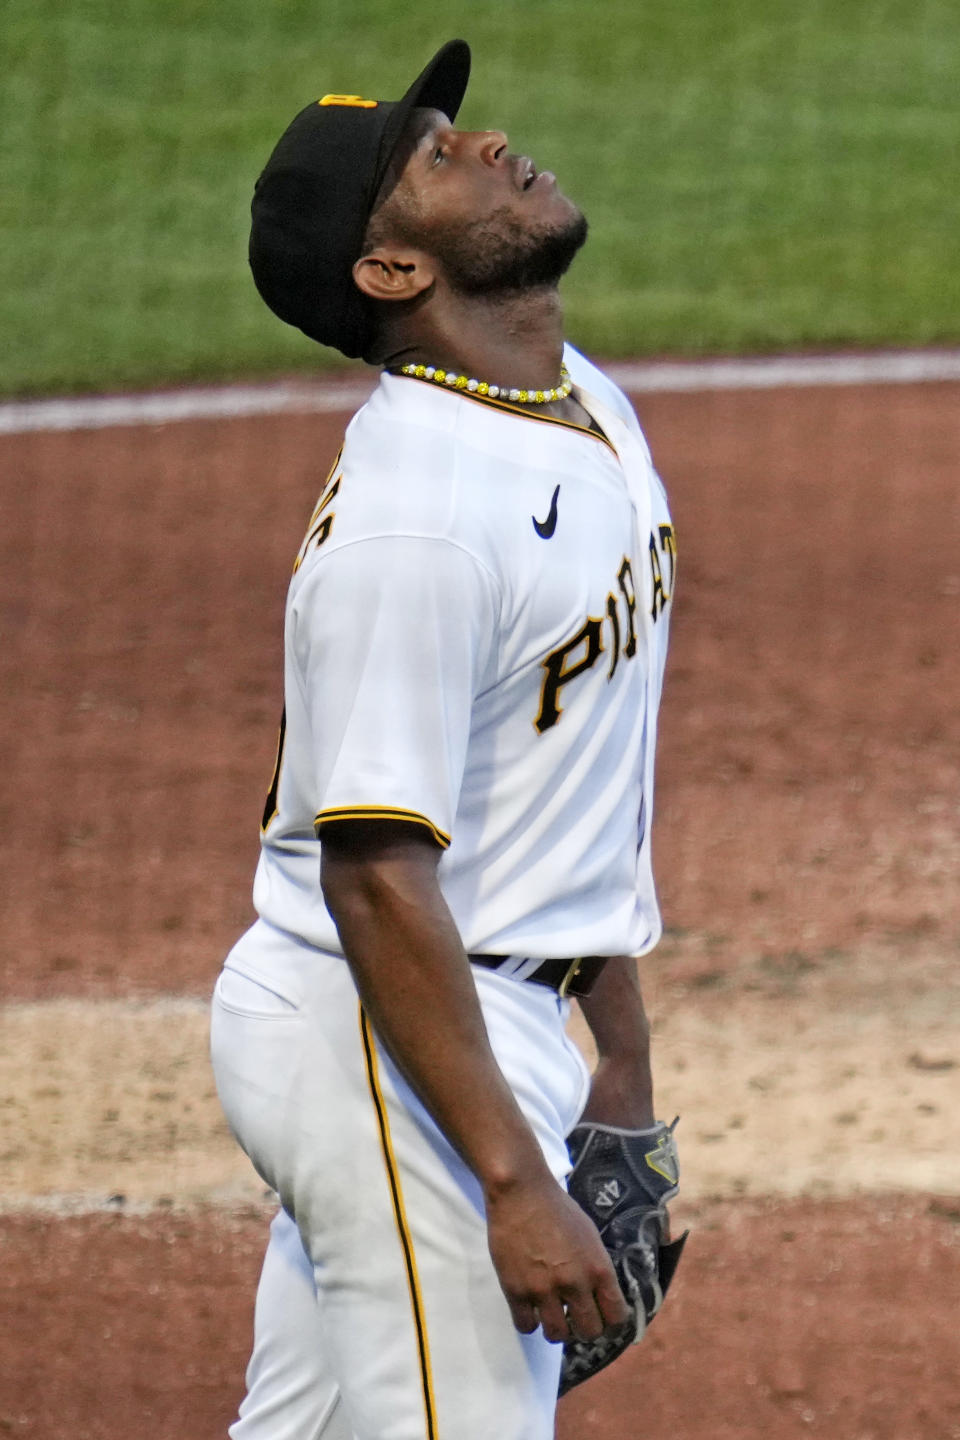 Pittsburgh Pirates starting pitcher Roansy Contreras collects himself after giving up a single to St. Louis Cardinals' Nolan Gorman, allowing a run to score, during the third inning of a baseball game in Pittsburgh, Friday, June 2, 2023. (AP Photo/Gene J. Puskar)